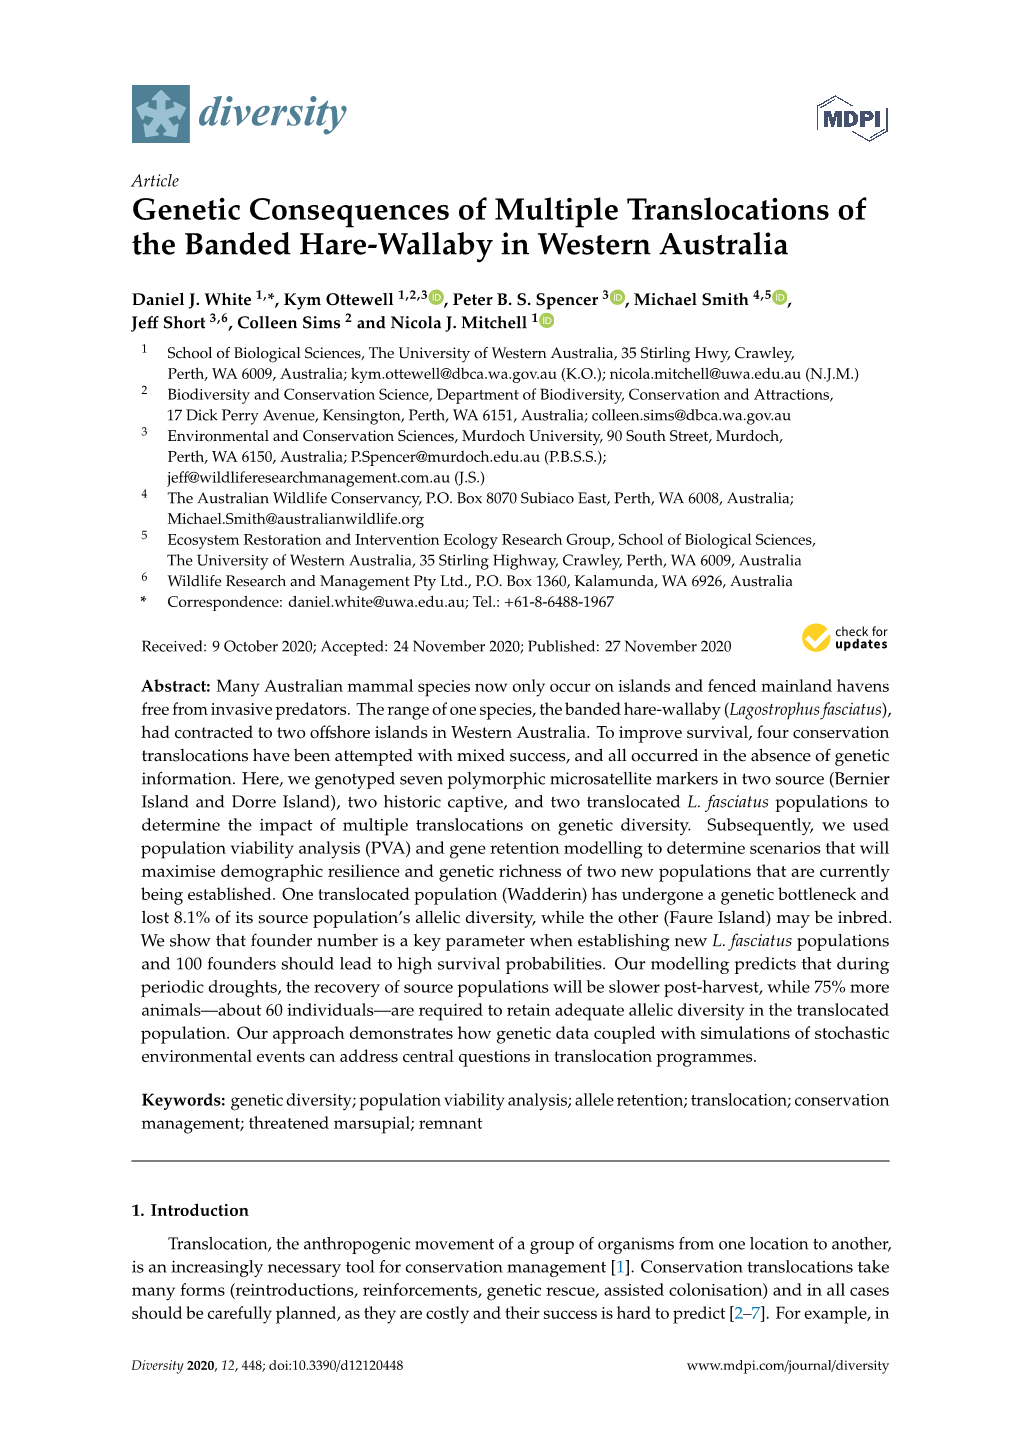 Genetic Consequences of Multiple Translocations of the Banded Hare-Wallaby in Western Australia